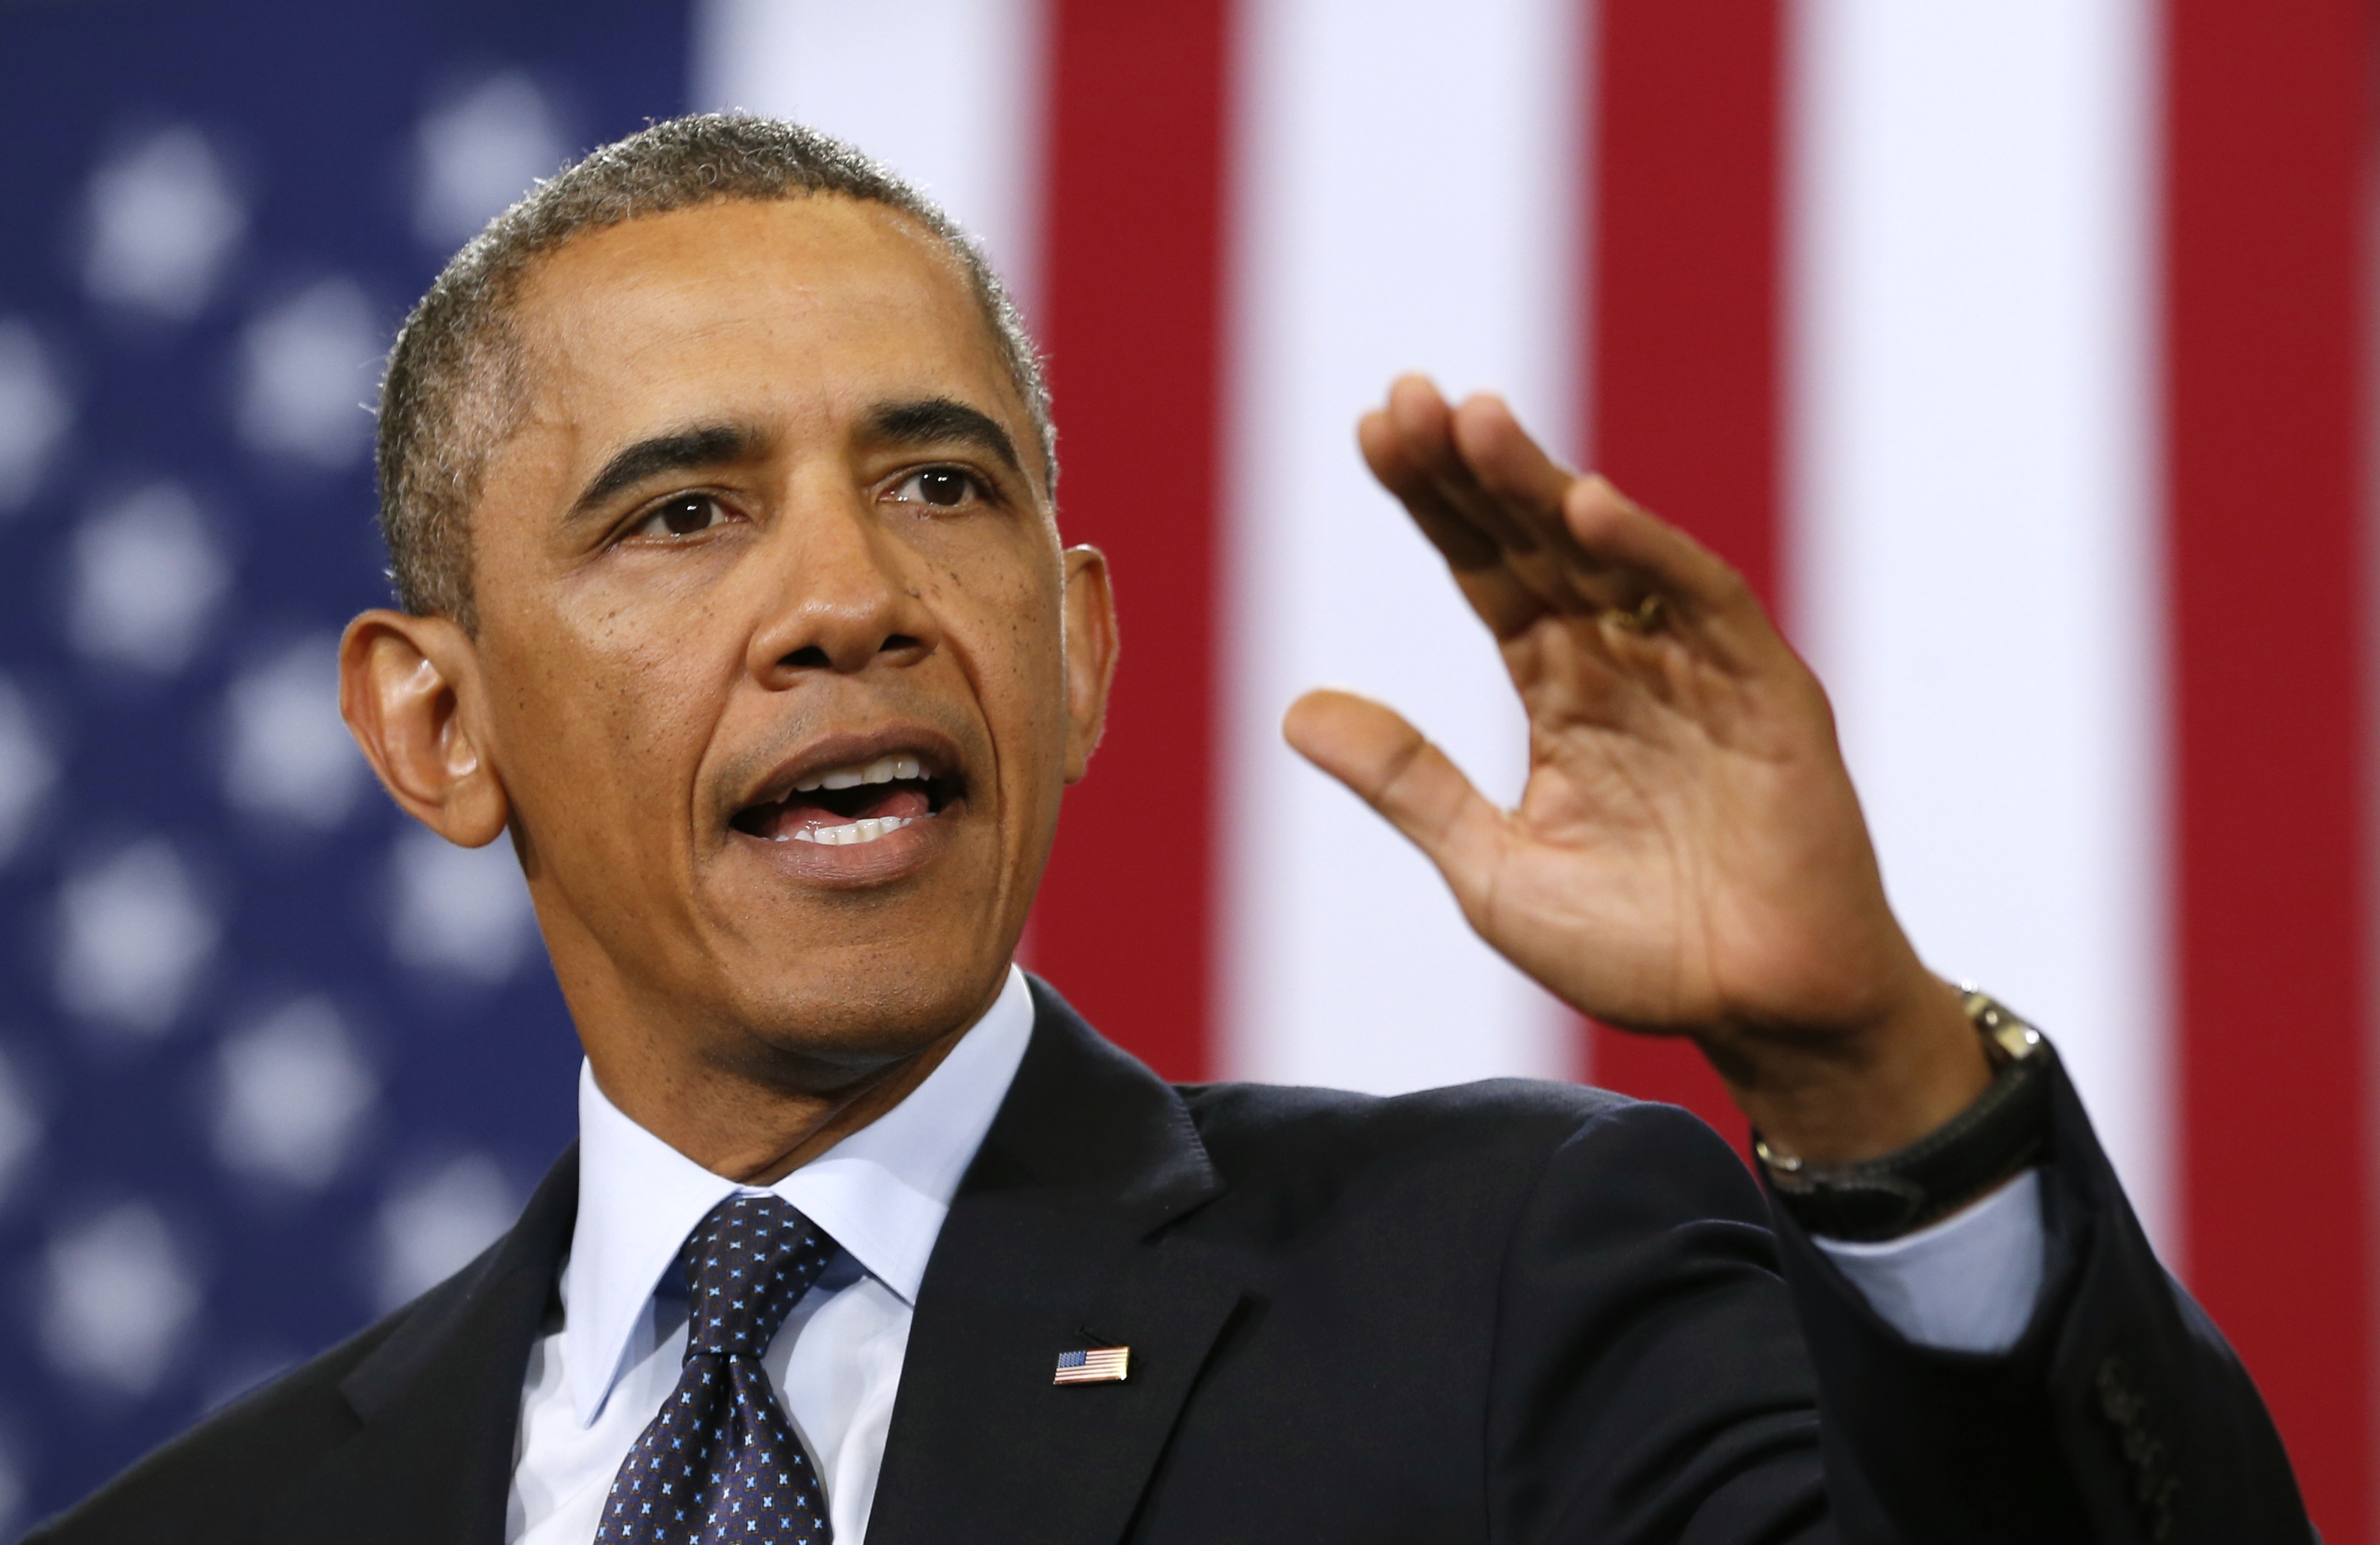 Obama admits 'challenge' of stopping Islamic State